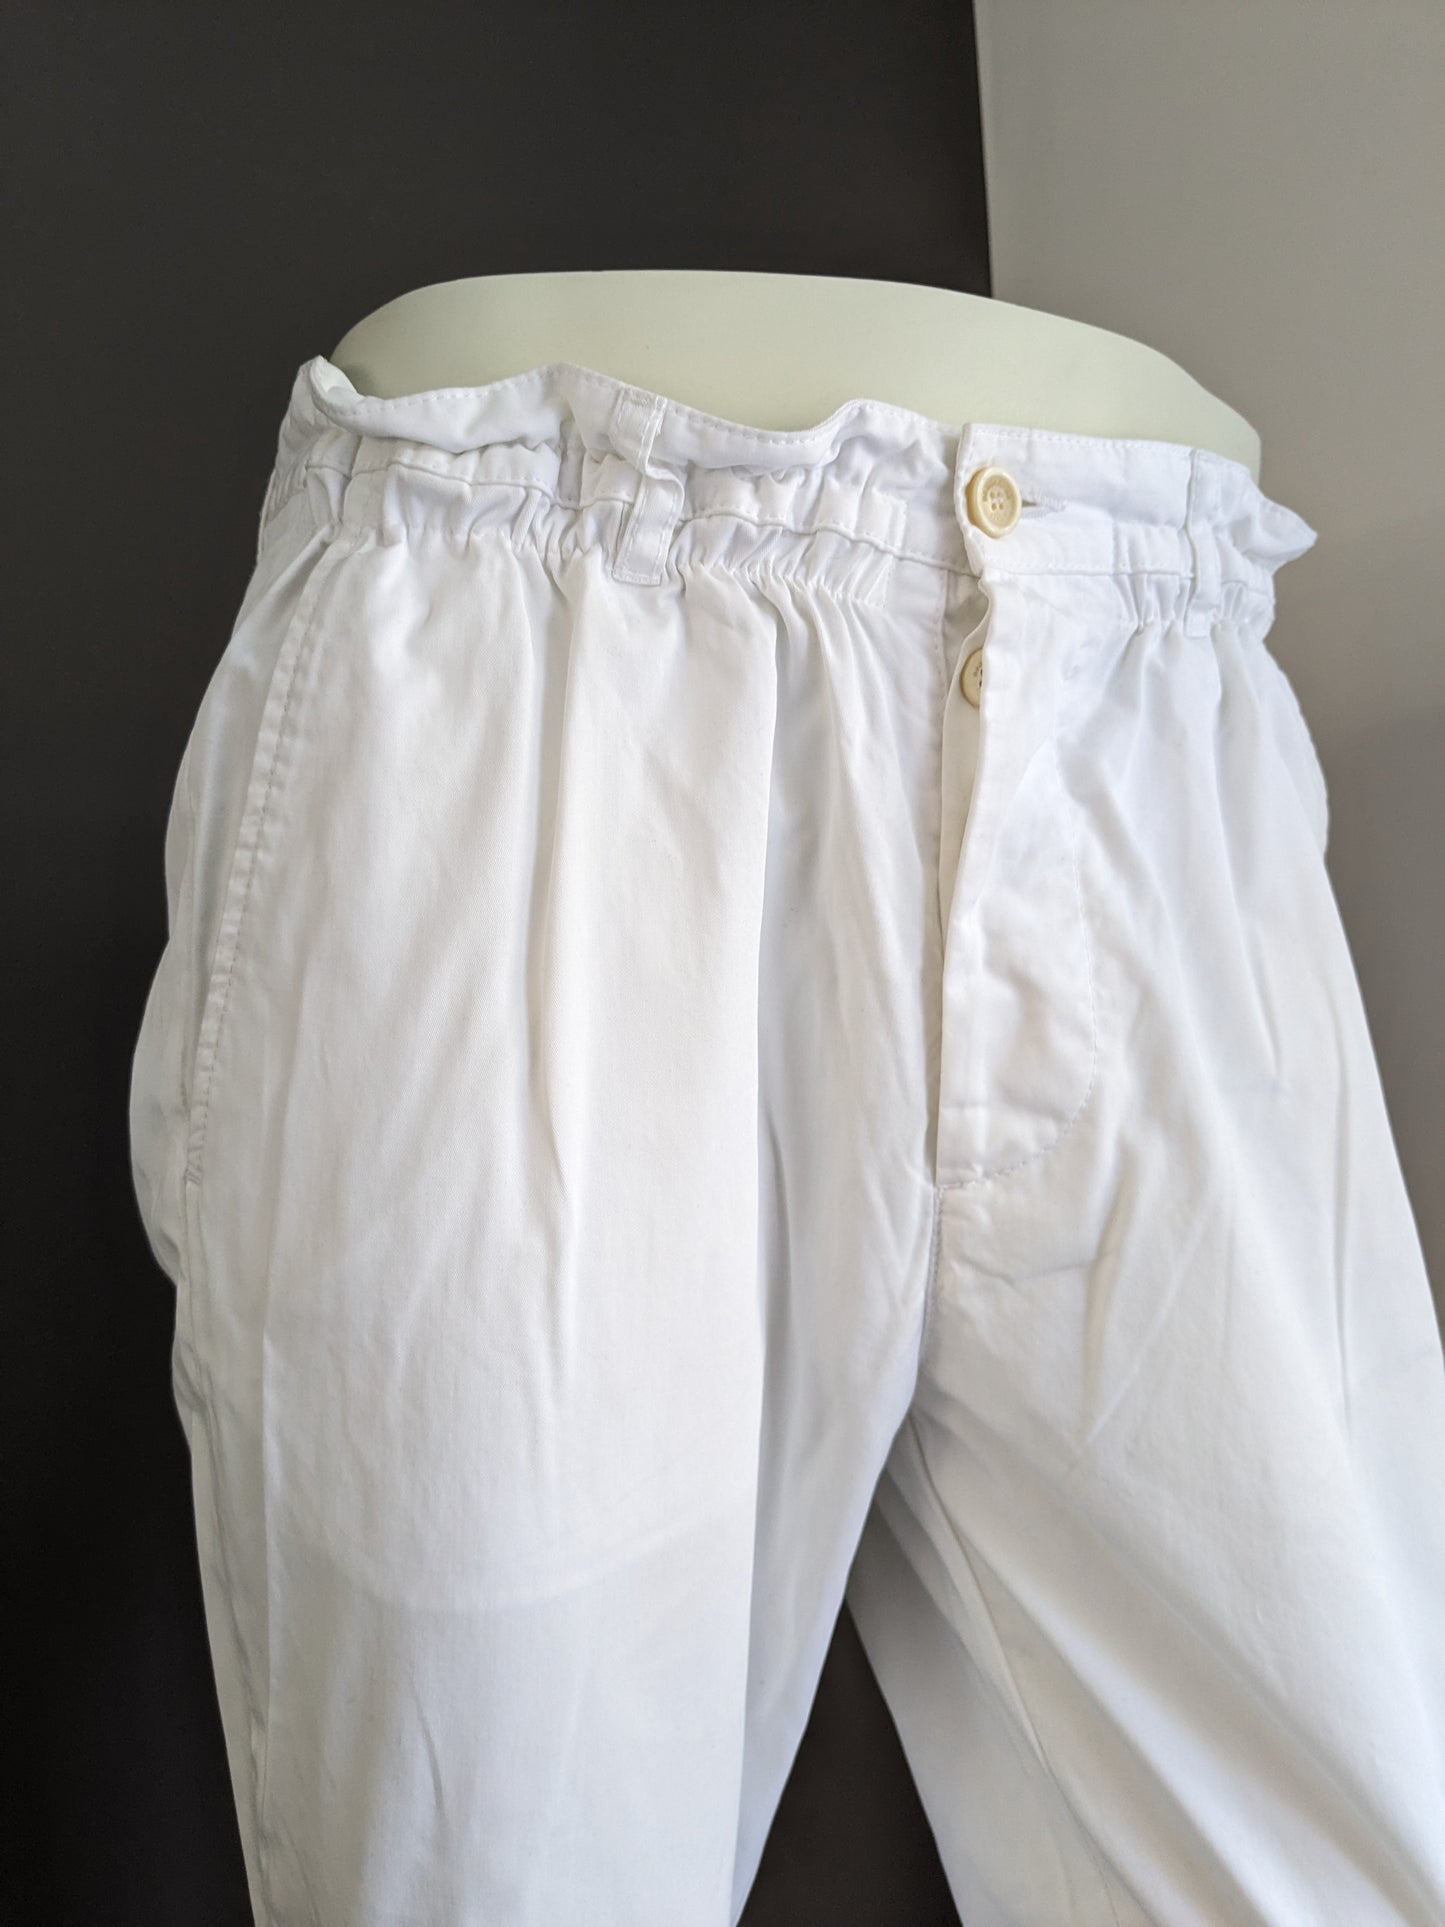 Dsquared2 trousers with elastic waistband. Colored white. Size 48 / M.